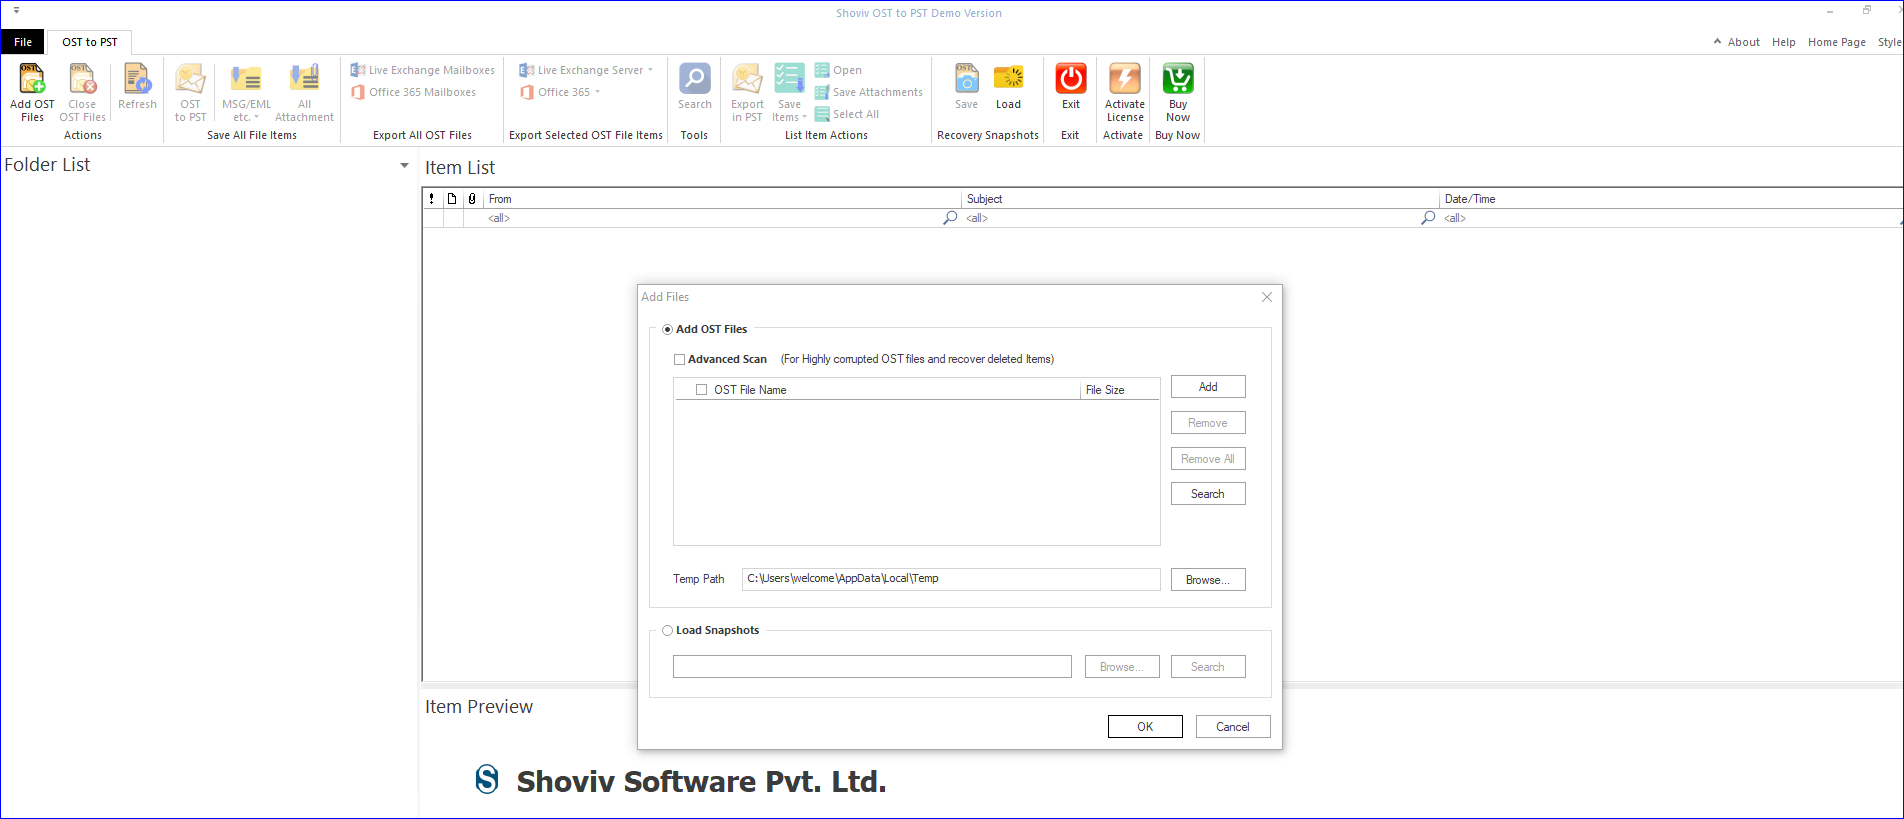 • Install and Launch the Shoviv Software